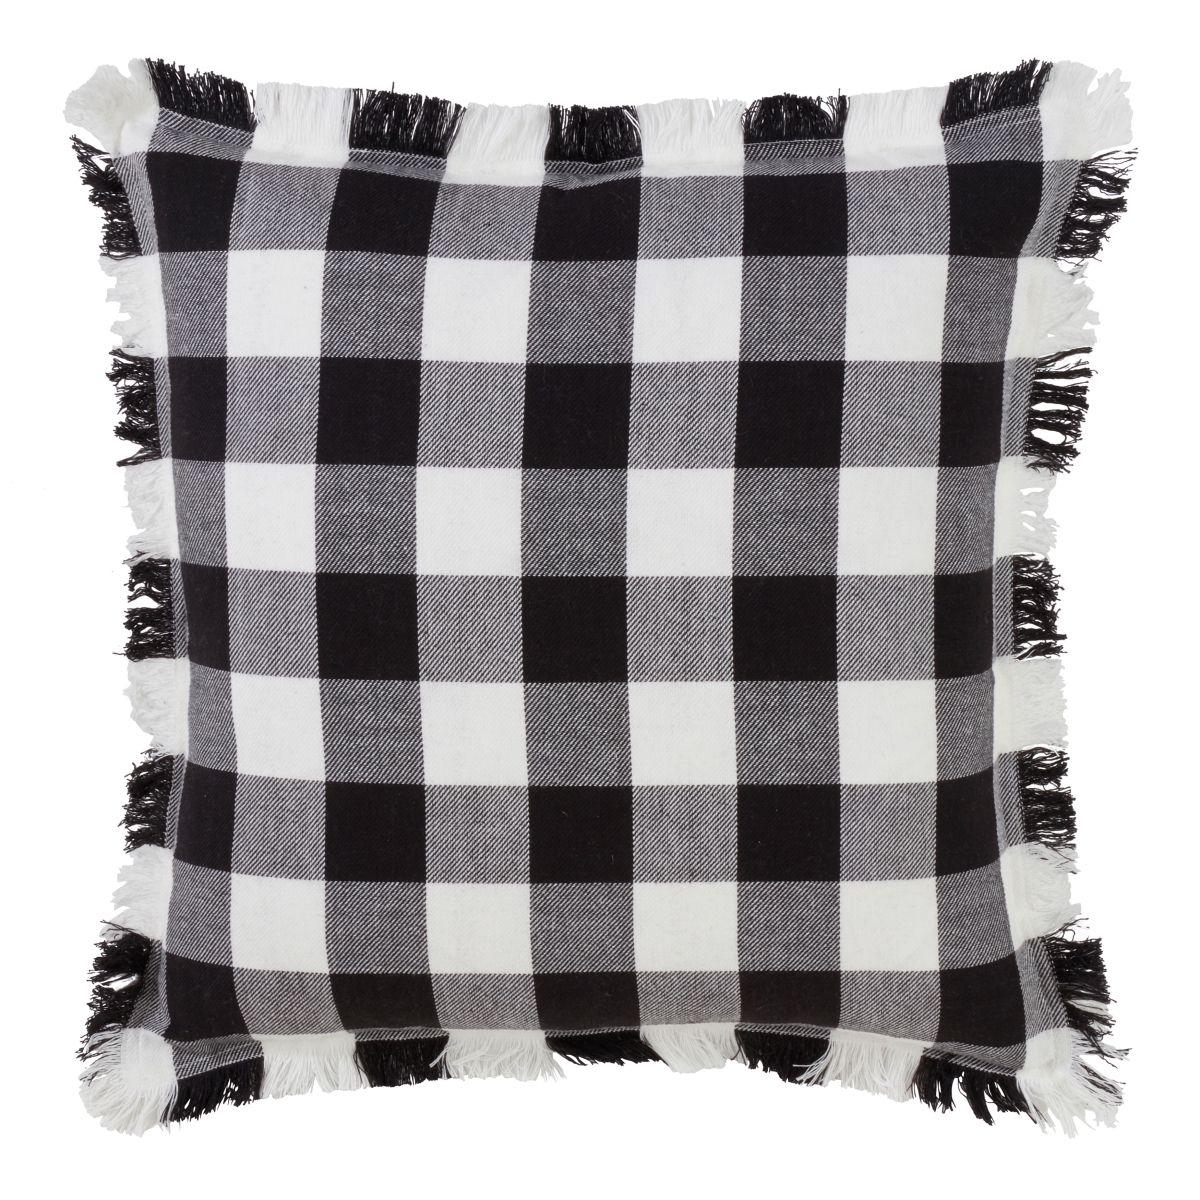 Picture of SARO 9026P.BK20S 20 in. Square Fringed Buffalo Plaid Design Cotton Throw Pillow with Down Filling - Black